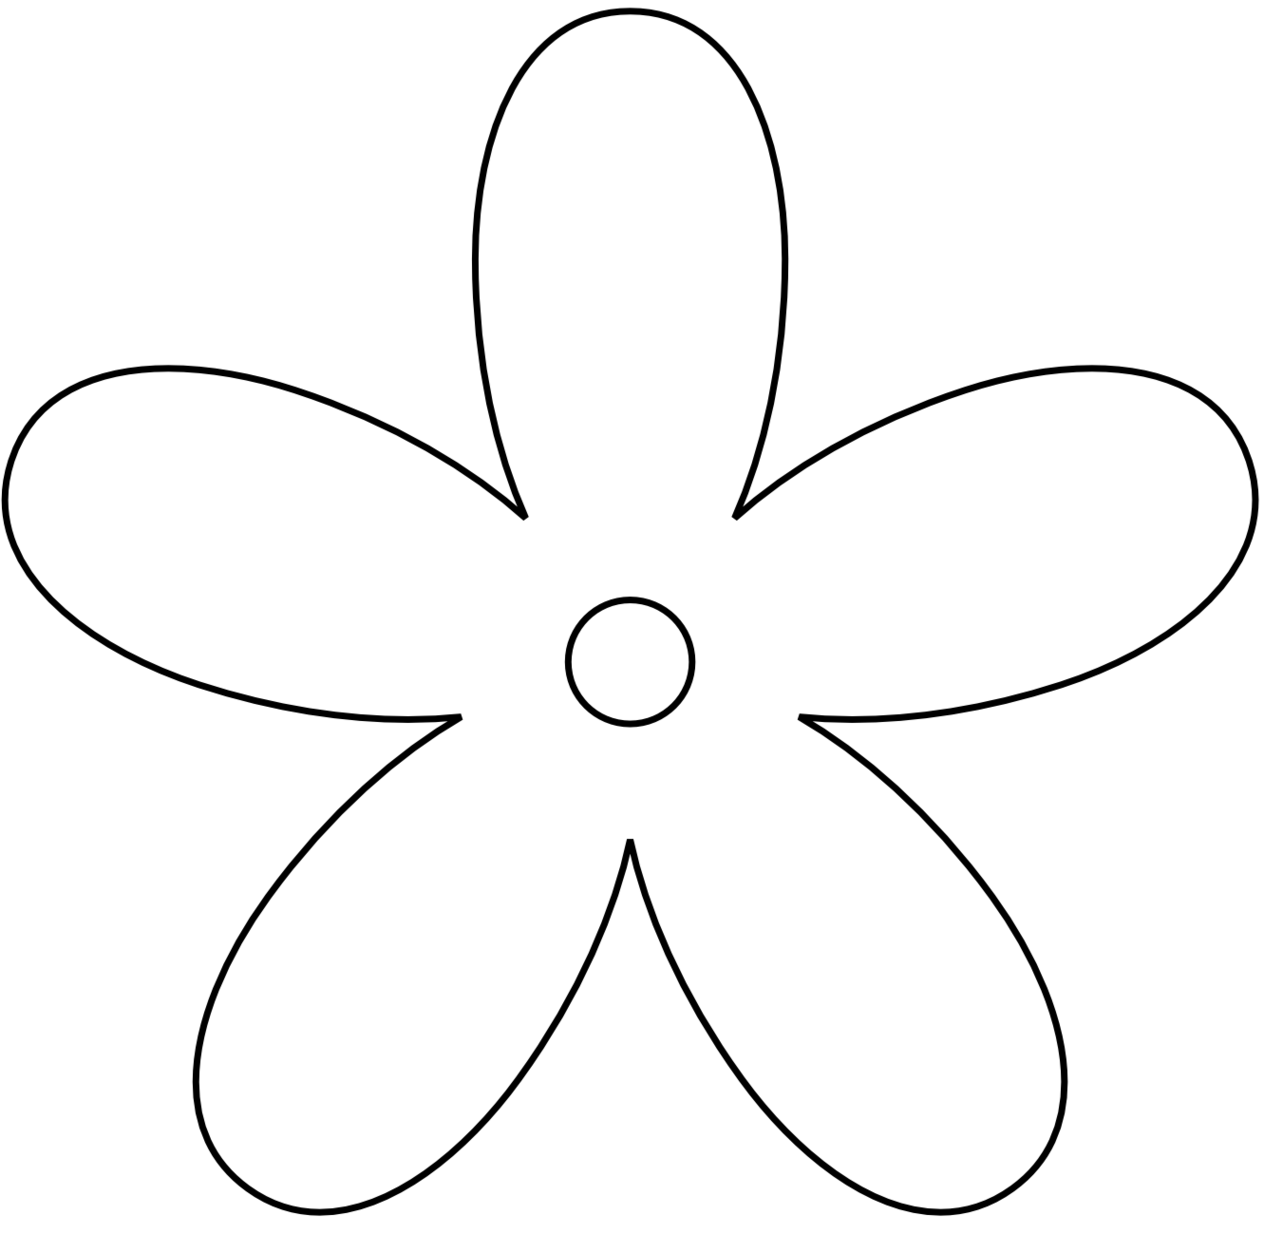 free clipart black and white flowers - photo #27